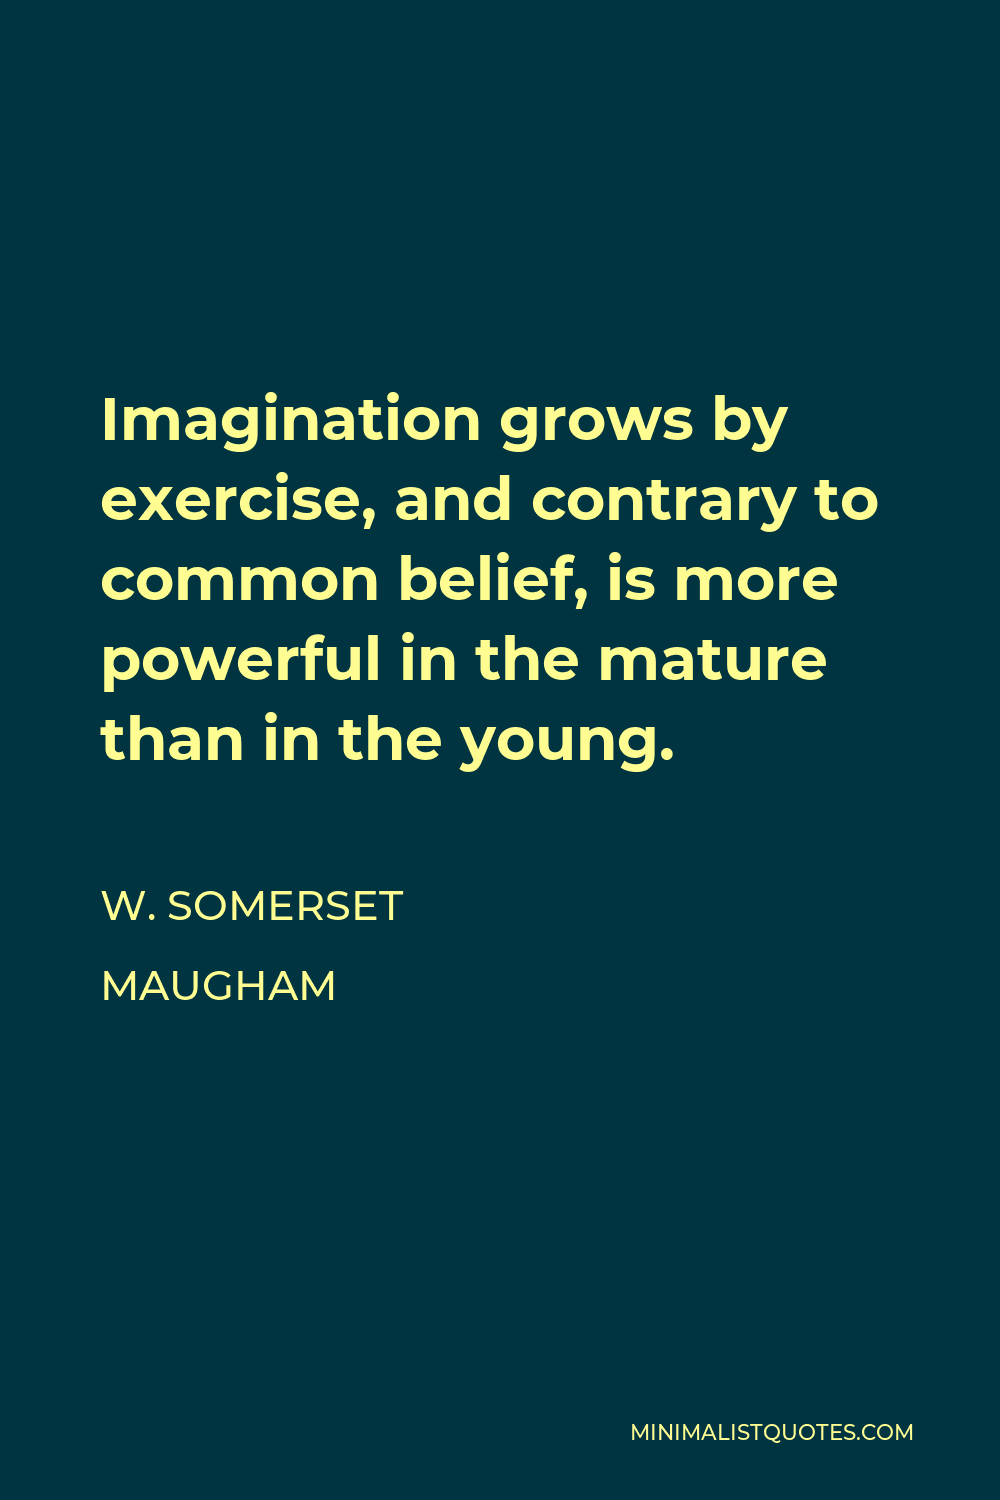 W. Somerset Maugham Quote - Imagination grows by exercise, and contrary to common belief, is more powerful in the mature than in the young.